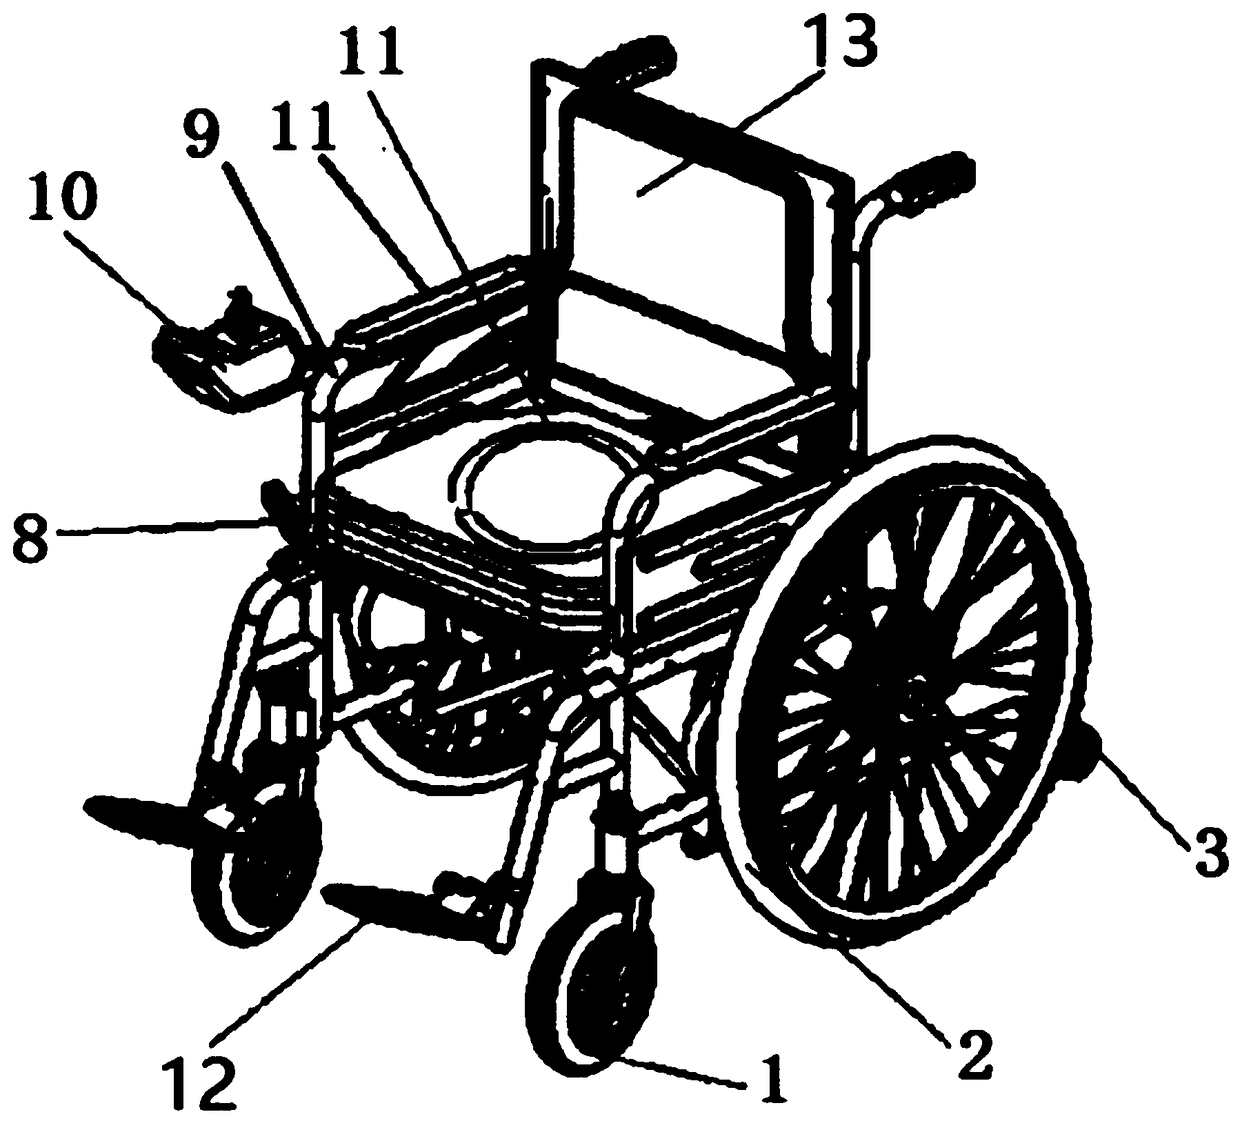 Easy-to-operate, safe and reliable electric wheelchair with massage pad